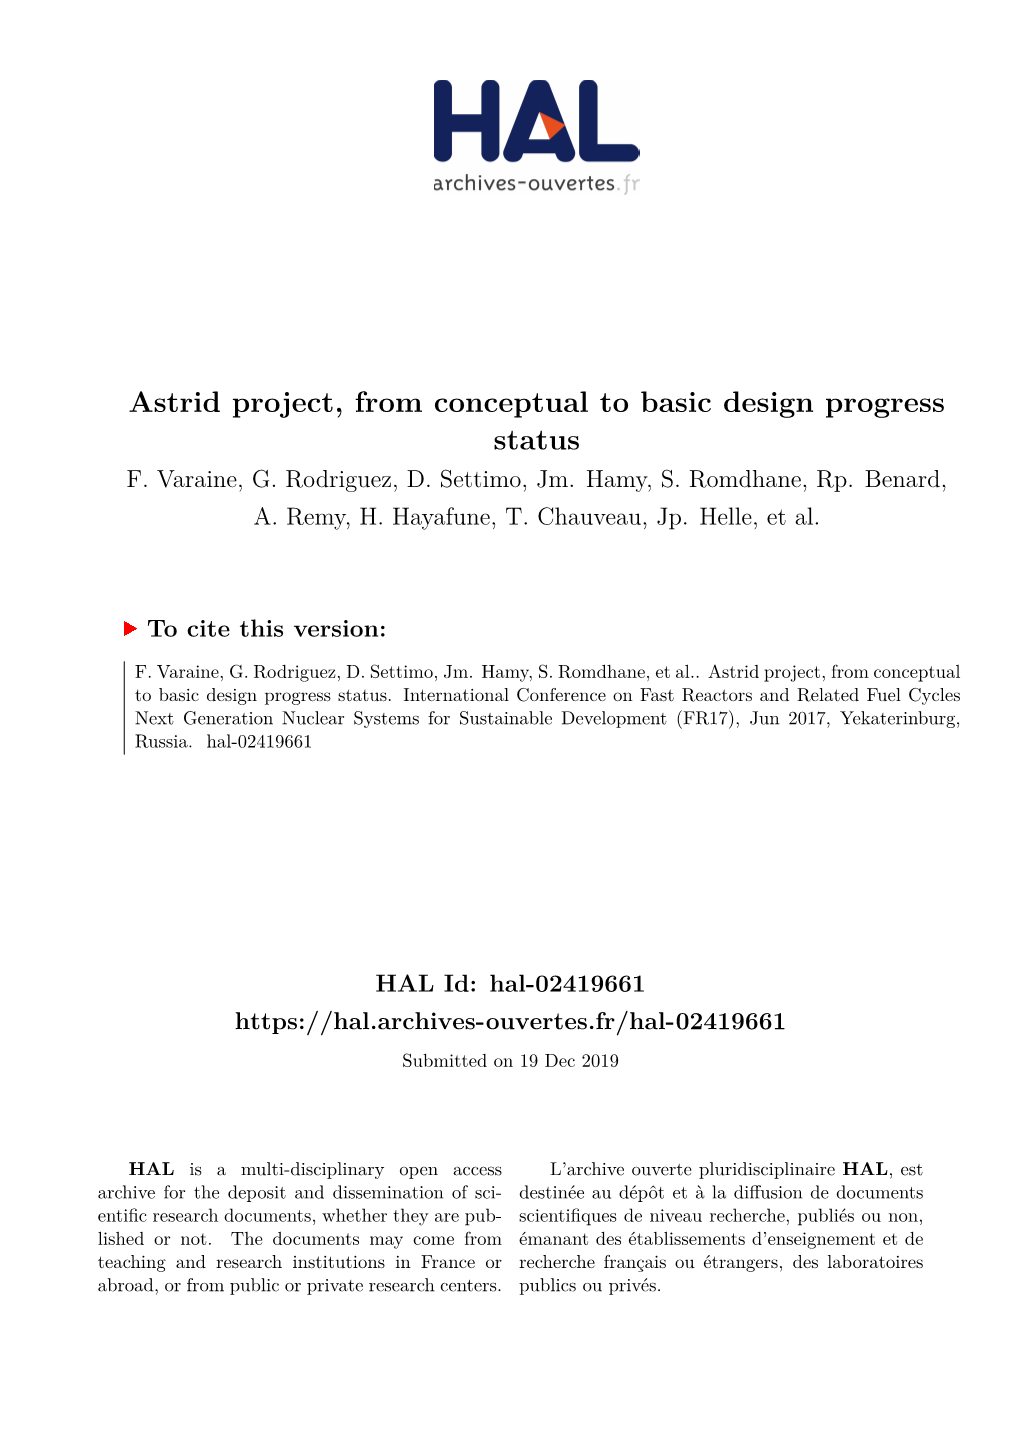 Astrid Project, from Conceptual to Basic Design Progress Status F